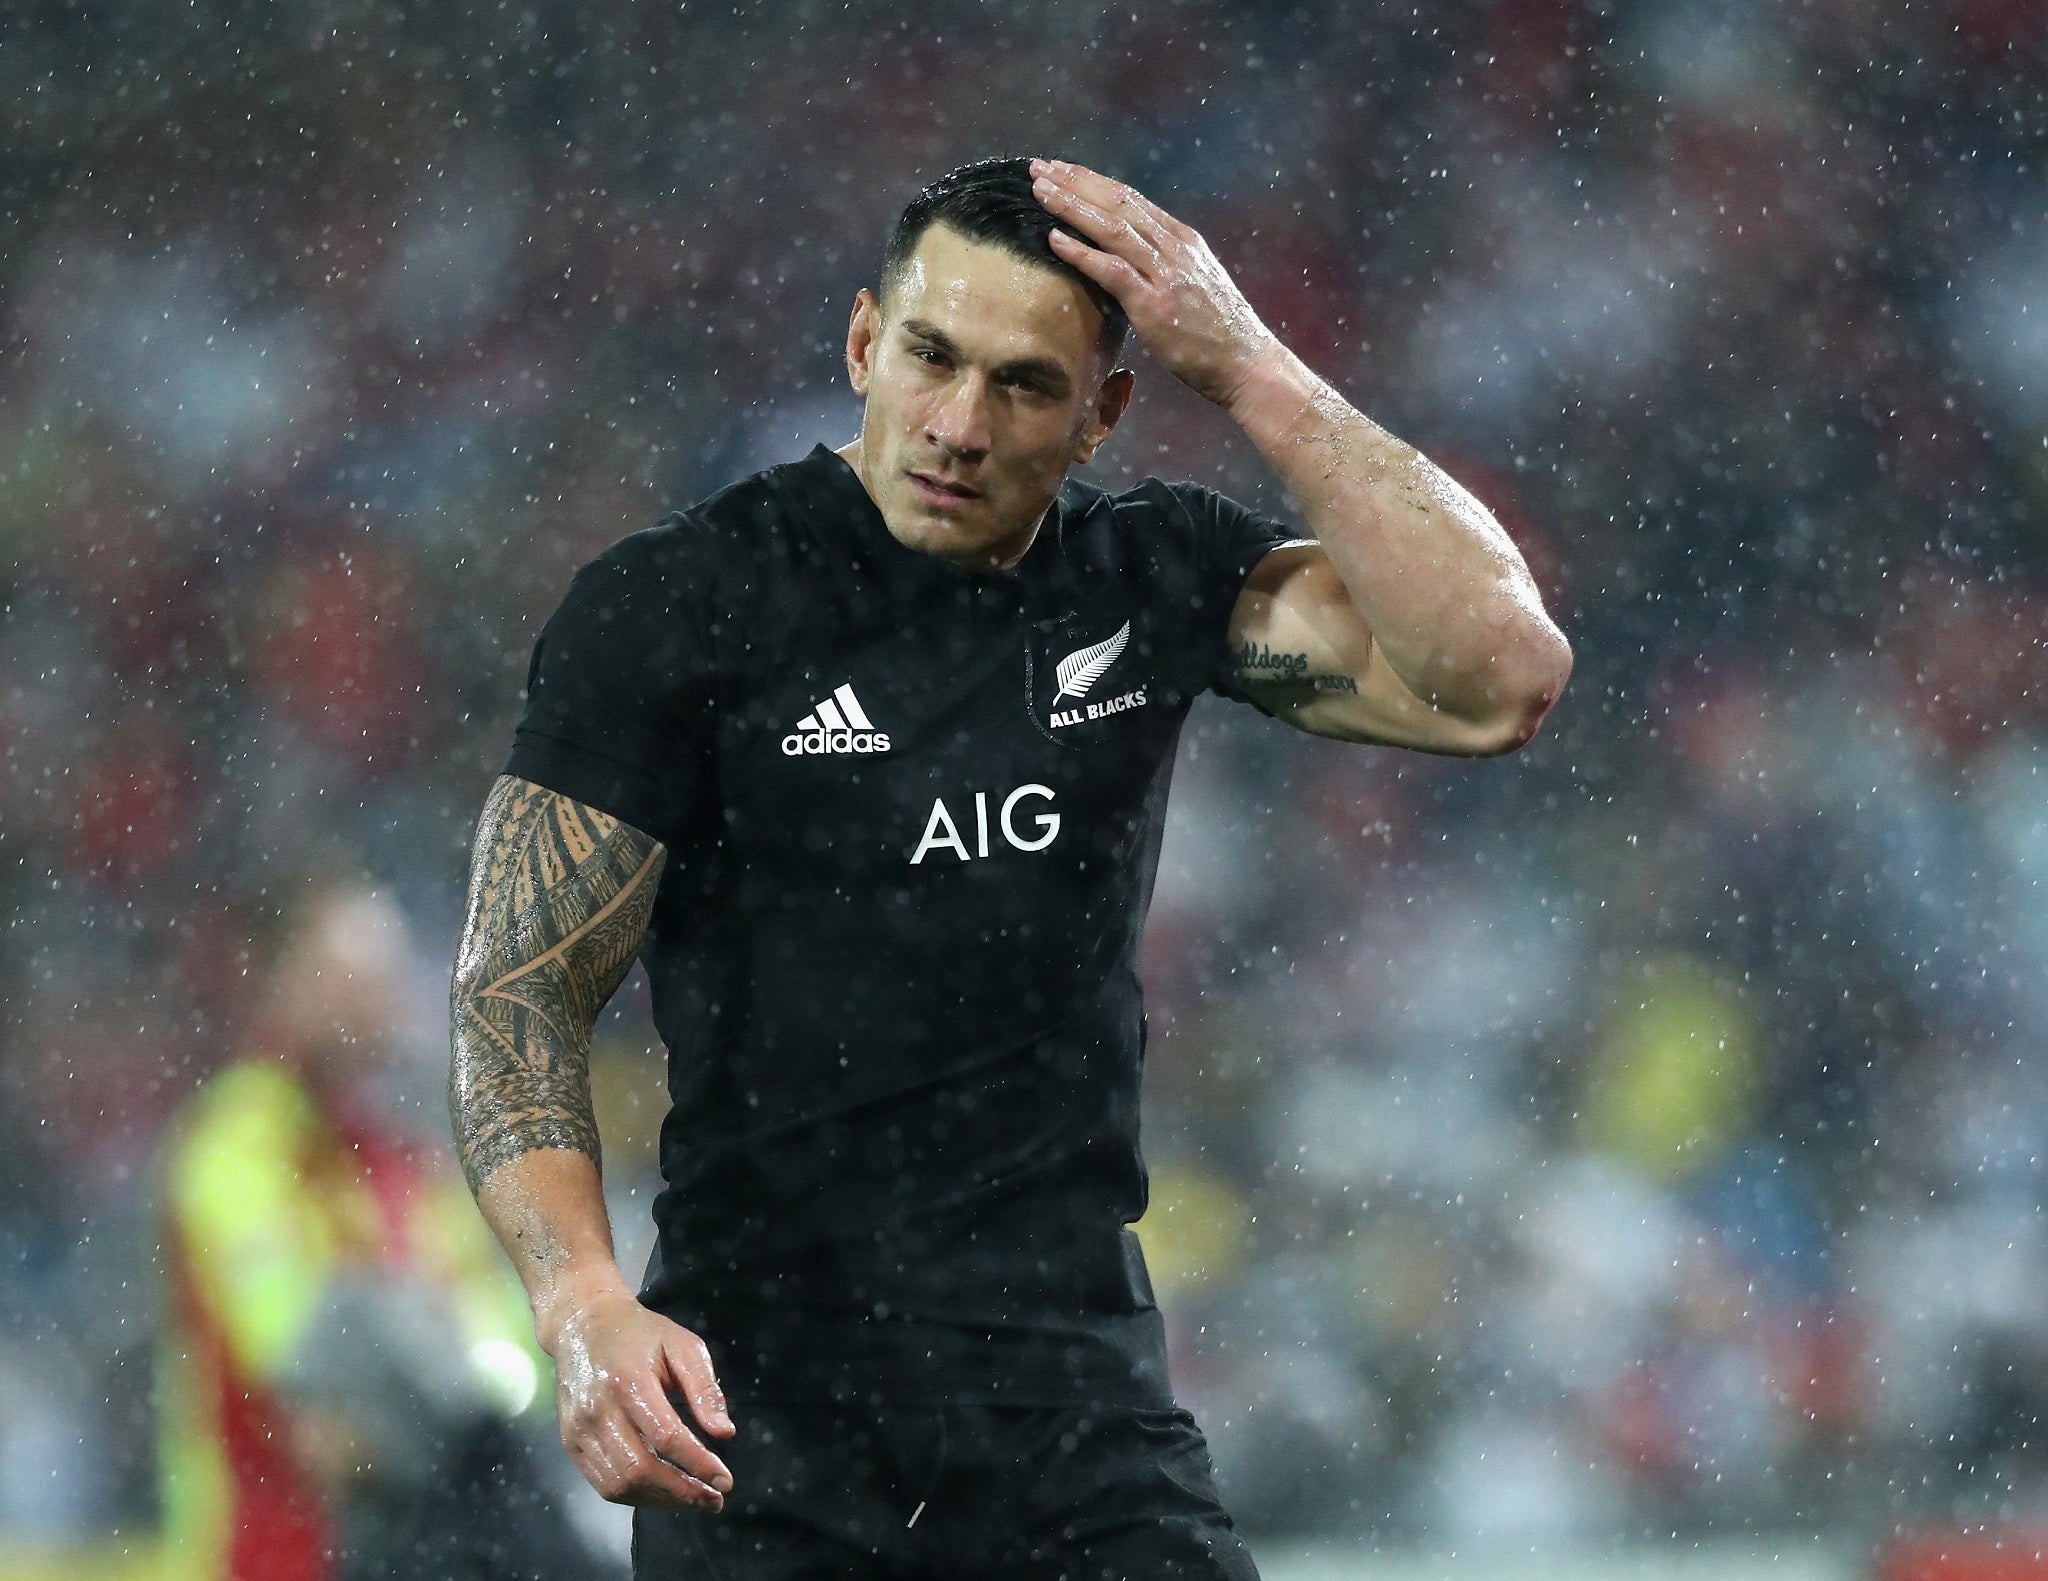 Sonny Bill Williams walks off the field after being shown a red card in the All Blacks' defeat by the Lions